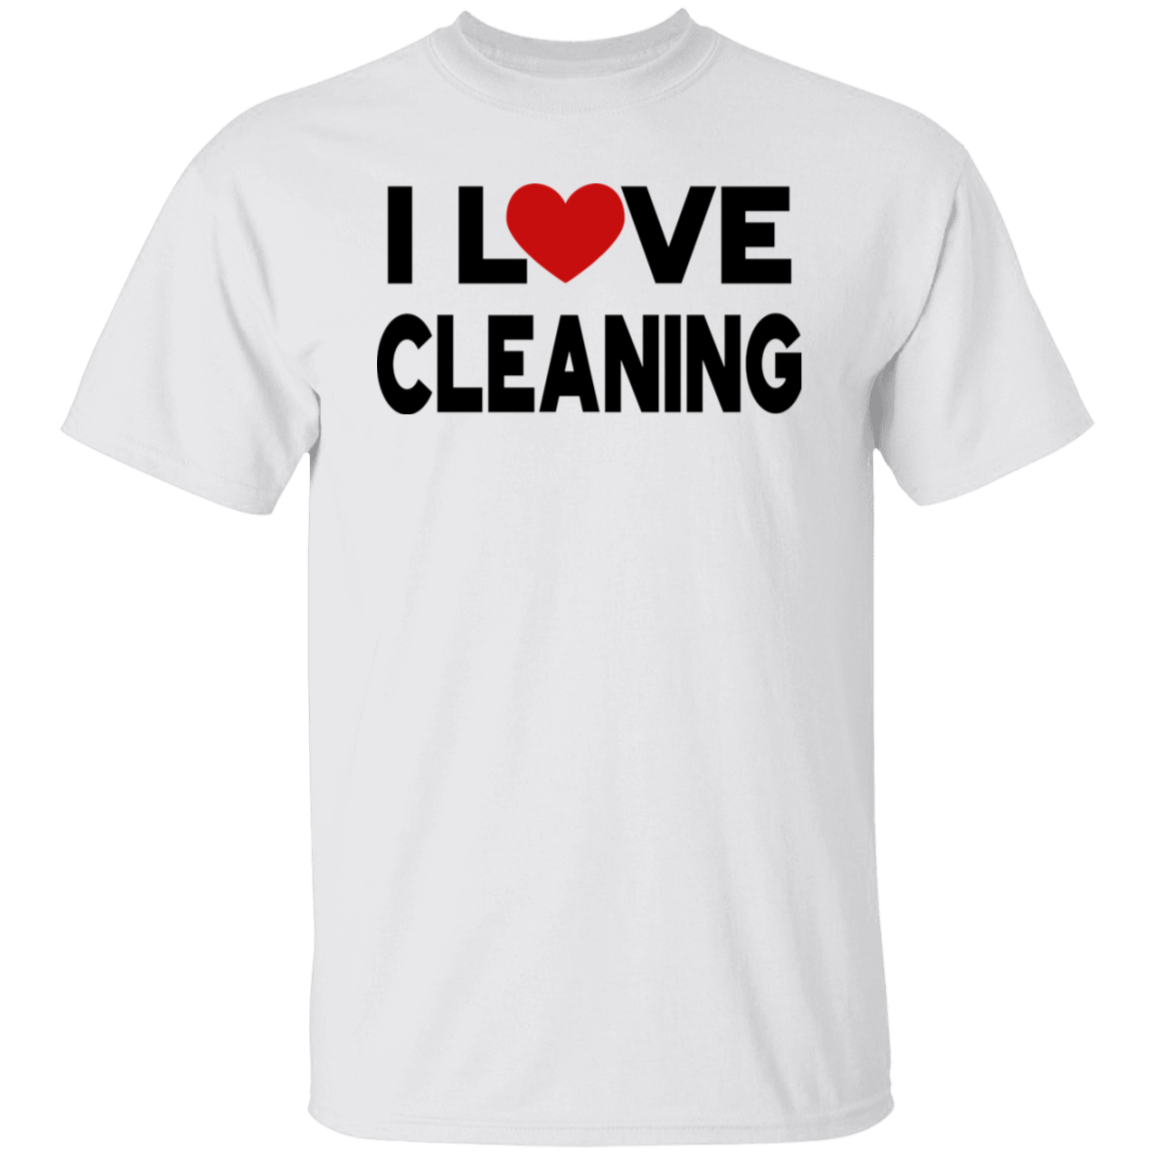 I Love Cleaning T-Shirt